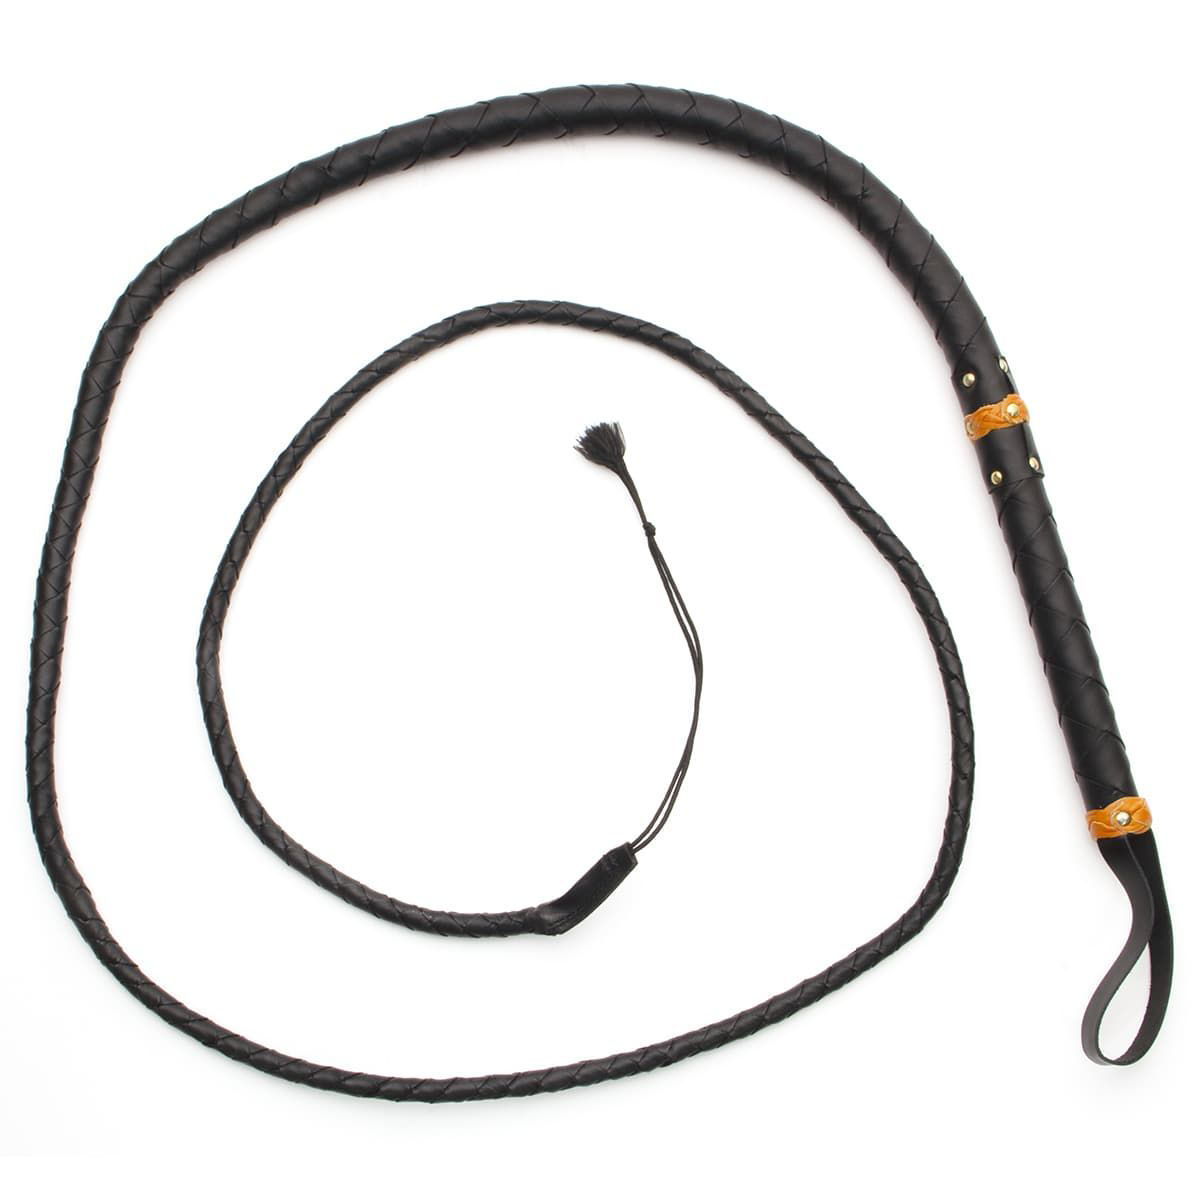 9 foot long full-grain leather bull whip with tapered, braided leather bands, hand made top grain leather